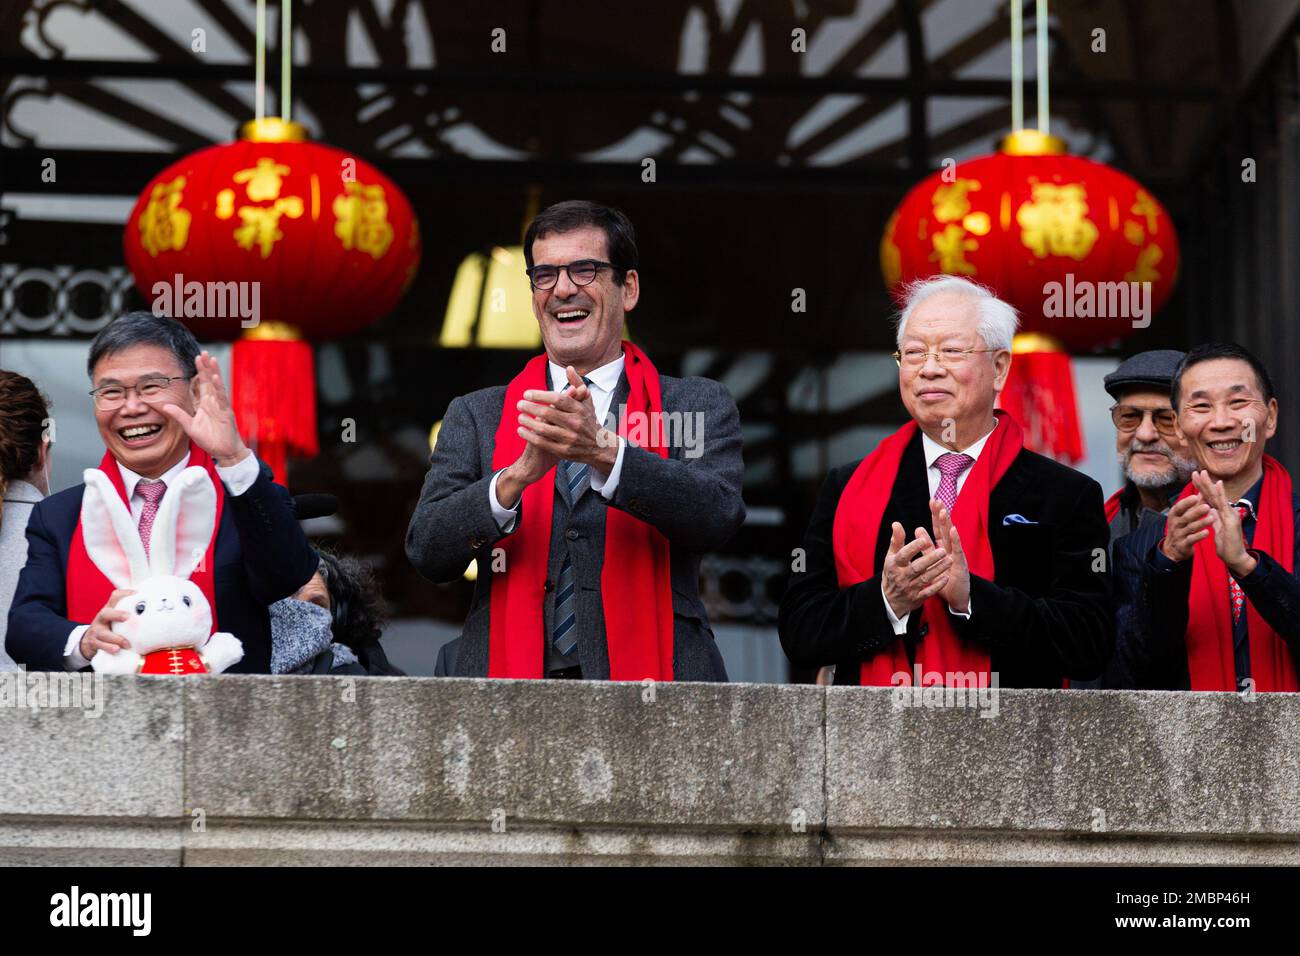 Porto, Portugal. 20th Jan, 2023. Rui Moreira (C) with Chinese diplomatic members in Portugal, during celebrations of the Chinese New Year in Porto. Celebrations of the Chinese New Year, the rabbit year, took place in Porto City Hall, this Friday, with the traditional dragon dance, symbol of power in China. Rui Moreira, Porto mayor, welcomed the China ambassador, Zhao Bentang and his diplomatic members. (Photo by Telmo Pinto/SOPA Images/Sipa USA) Credit: Sipa USA/Alamy Live News Stock Photo